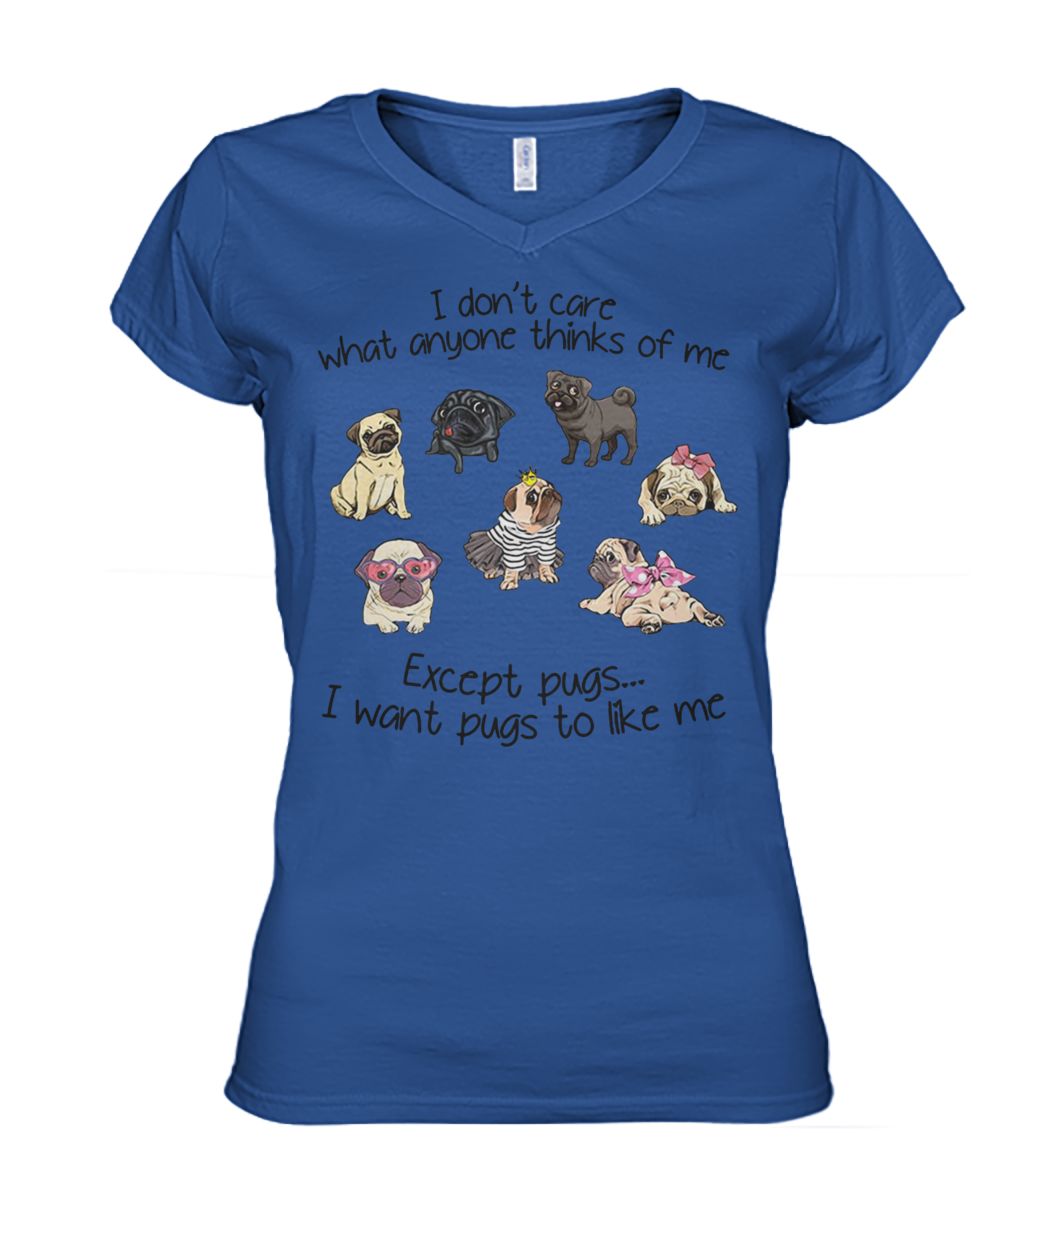 I don't care what anyone thinks of me excepts pugs I want pugs to like me women's v-neck